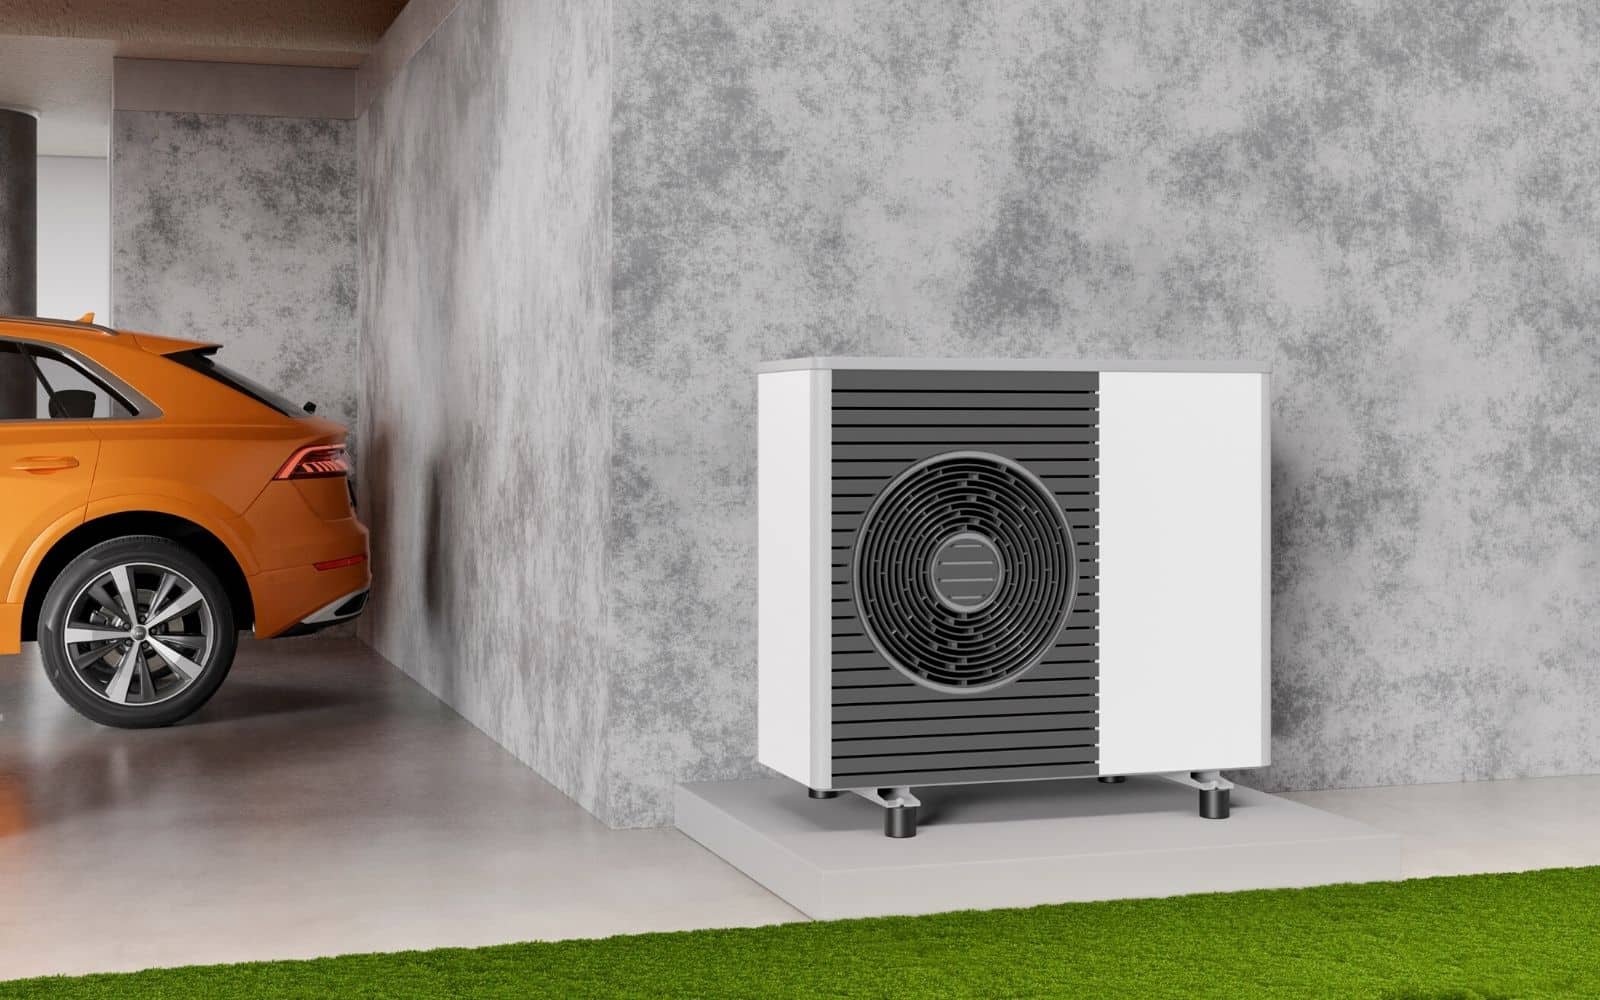 air source heat pump cost to install